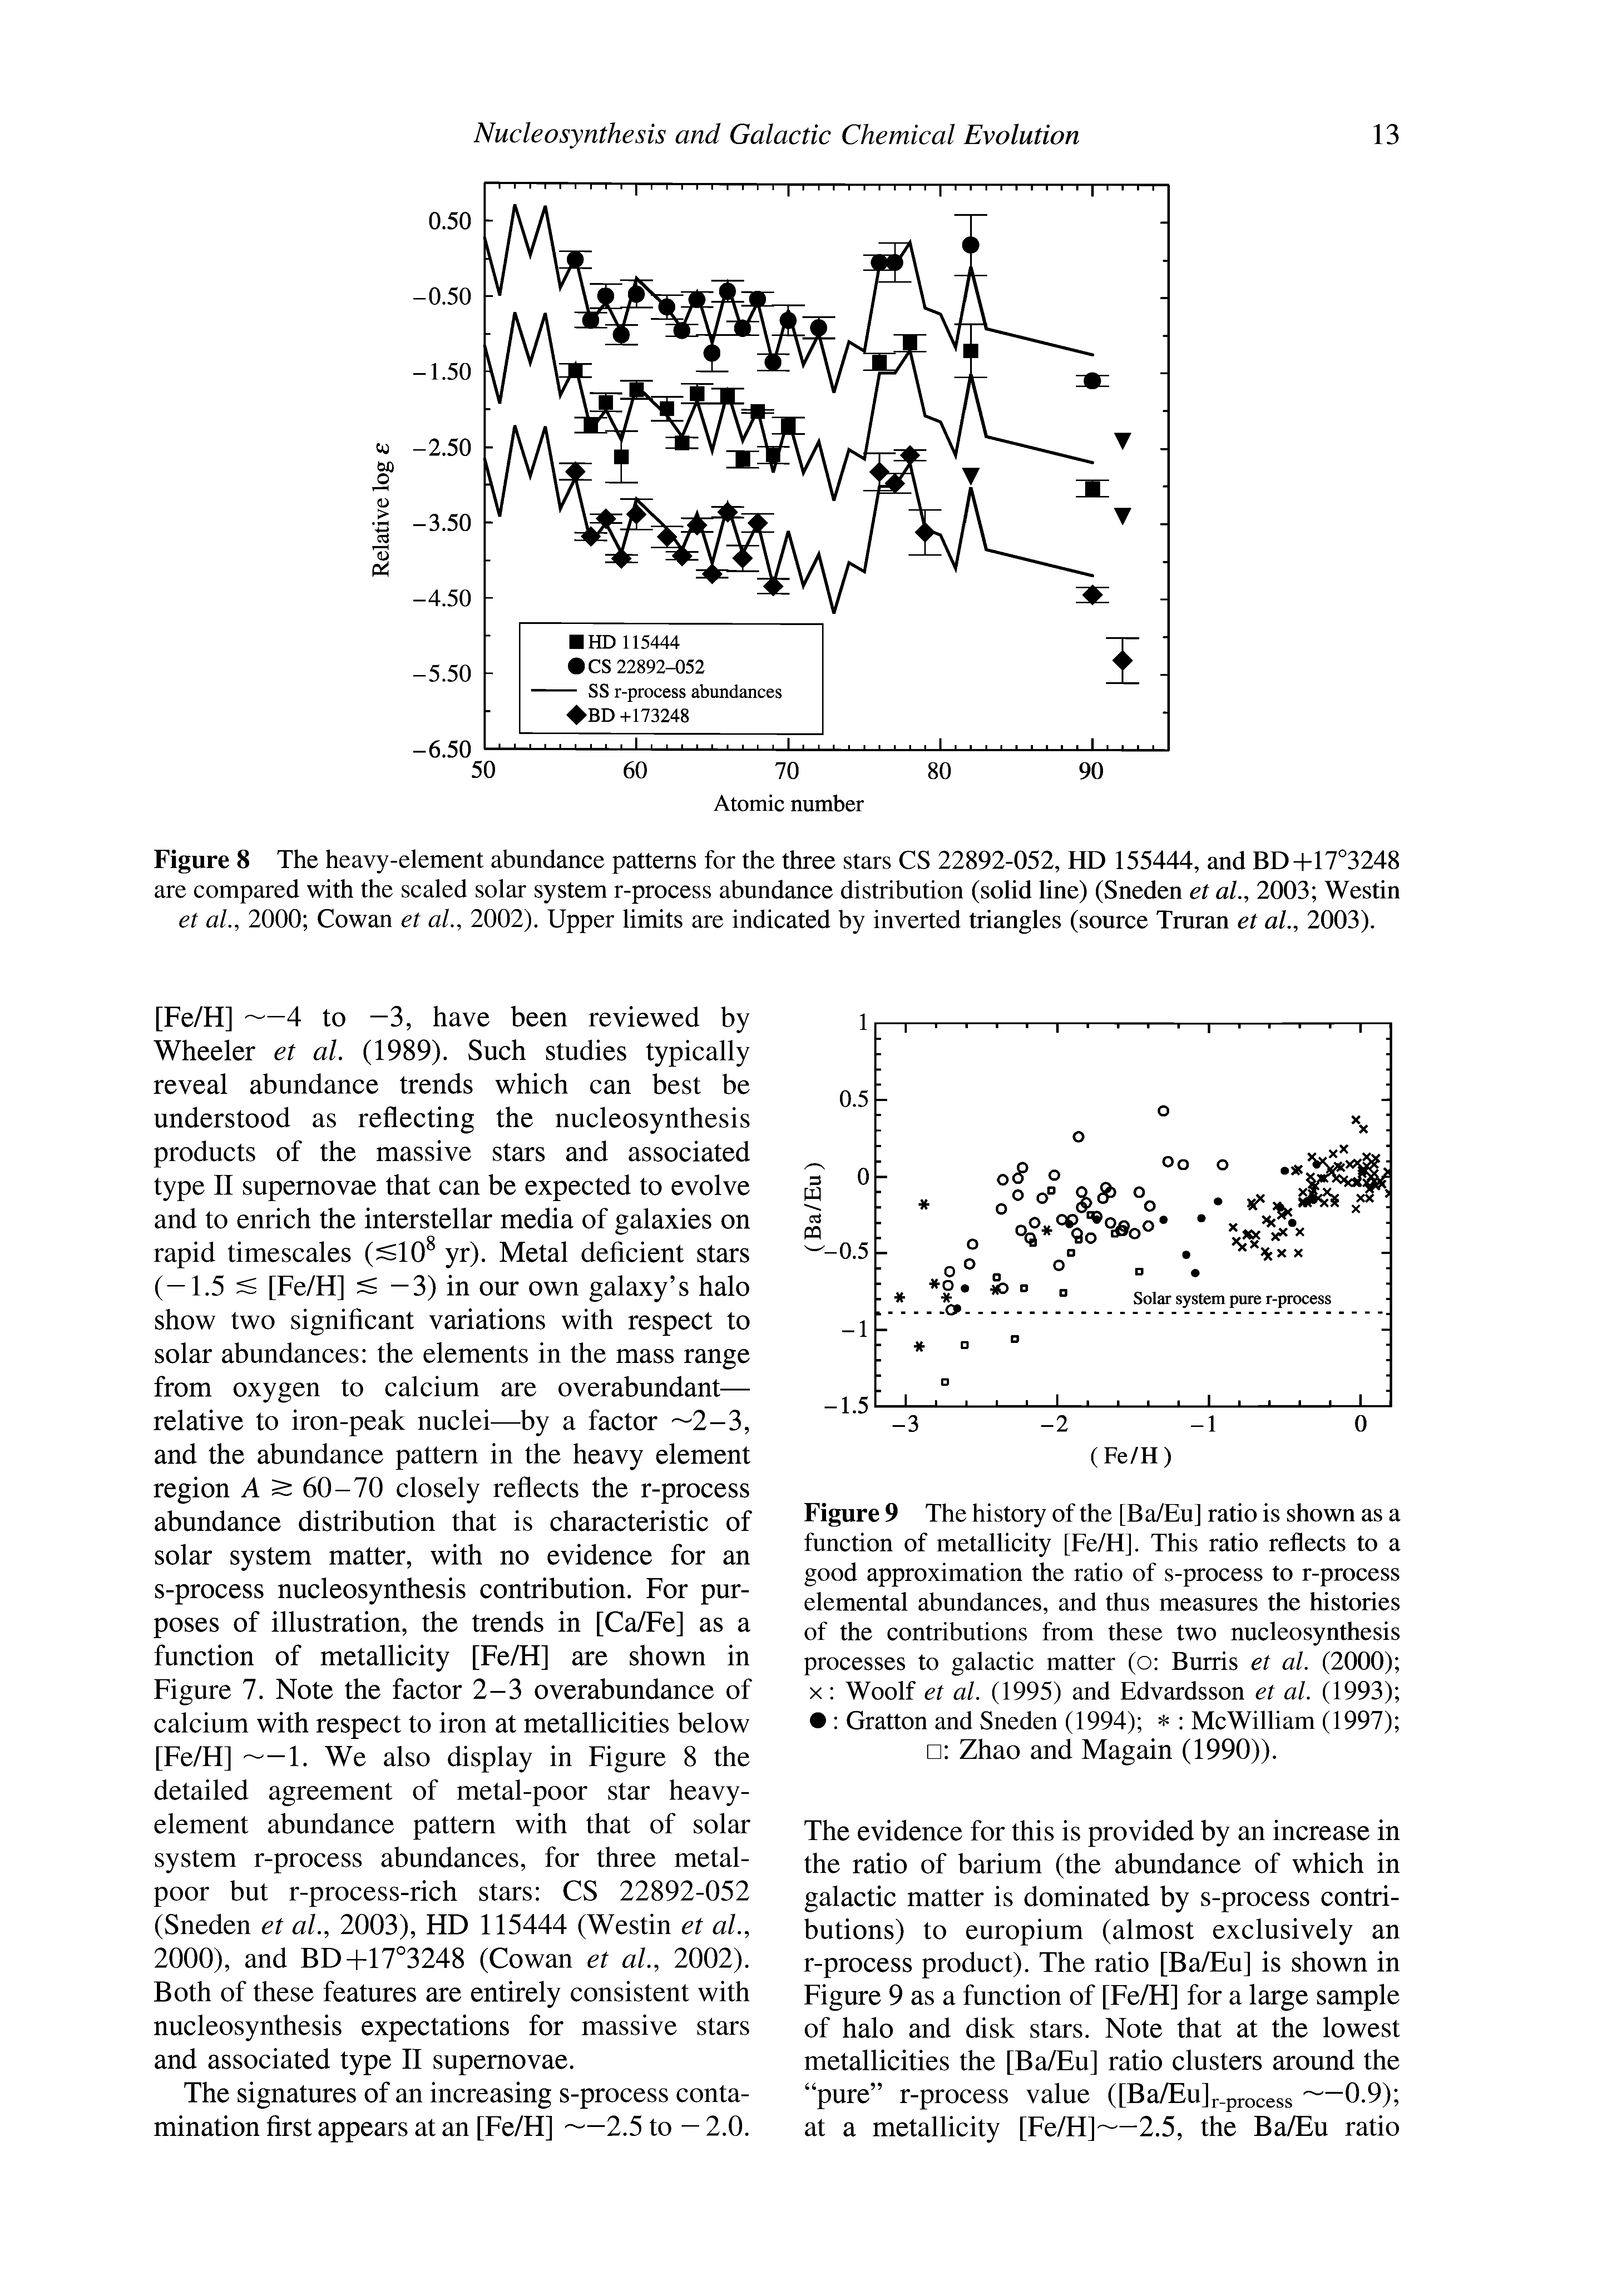 Figure 9 The history of the [Ba/Eu] ratio is shown as a function of metallicity [Fe/H]. This ratio reflects to a good approximation the ratio of s-process to r-process elemental abundances, and thus measures the histories of the contributions from these two nucleosynthesis processes to galactic matter (o Burris et al. (2000) X Woolf et al. (1995) and Edvardsson et al. (1993) Gratton and Sneden (1994) McWilliam (1997) ...